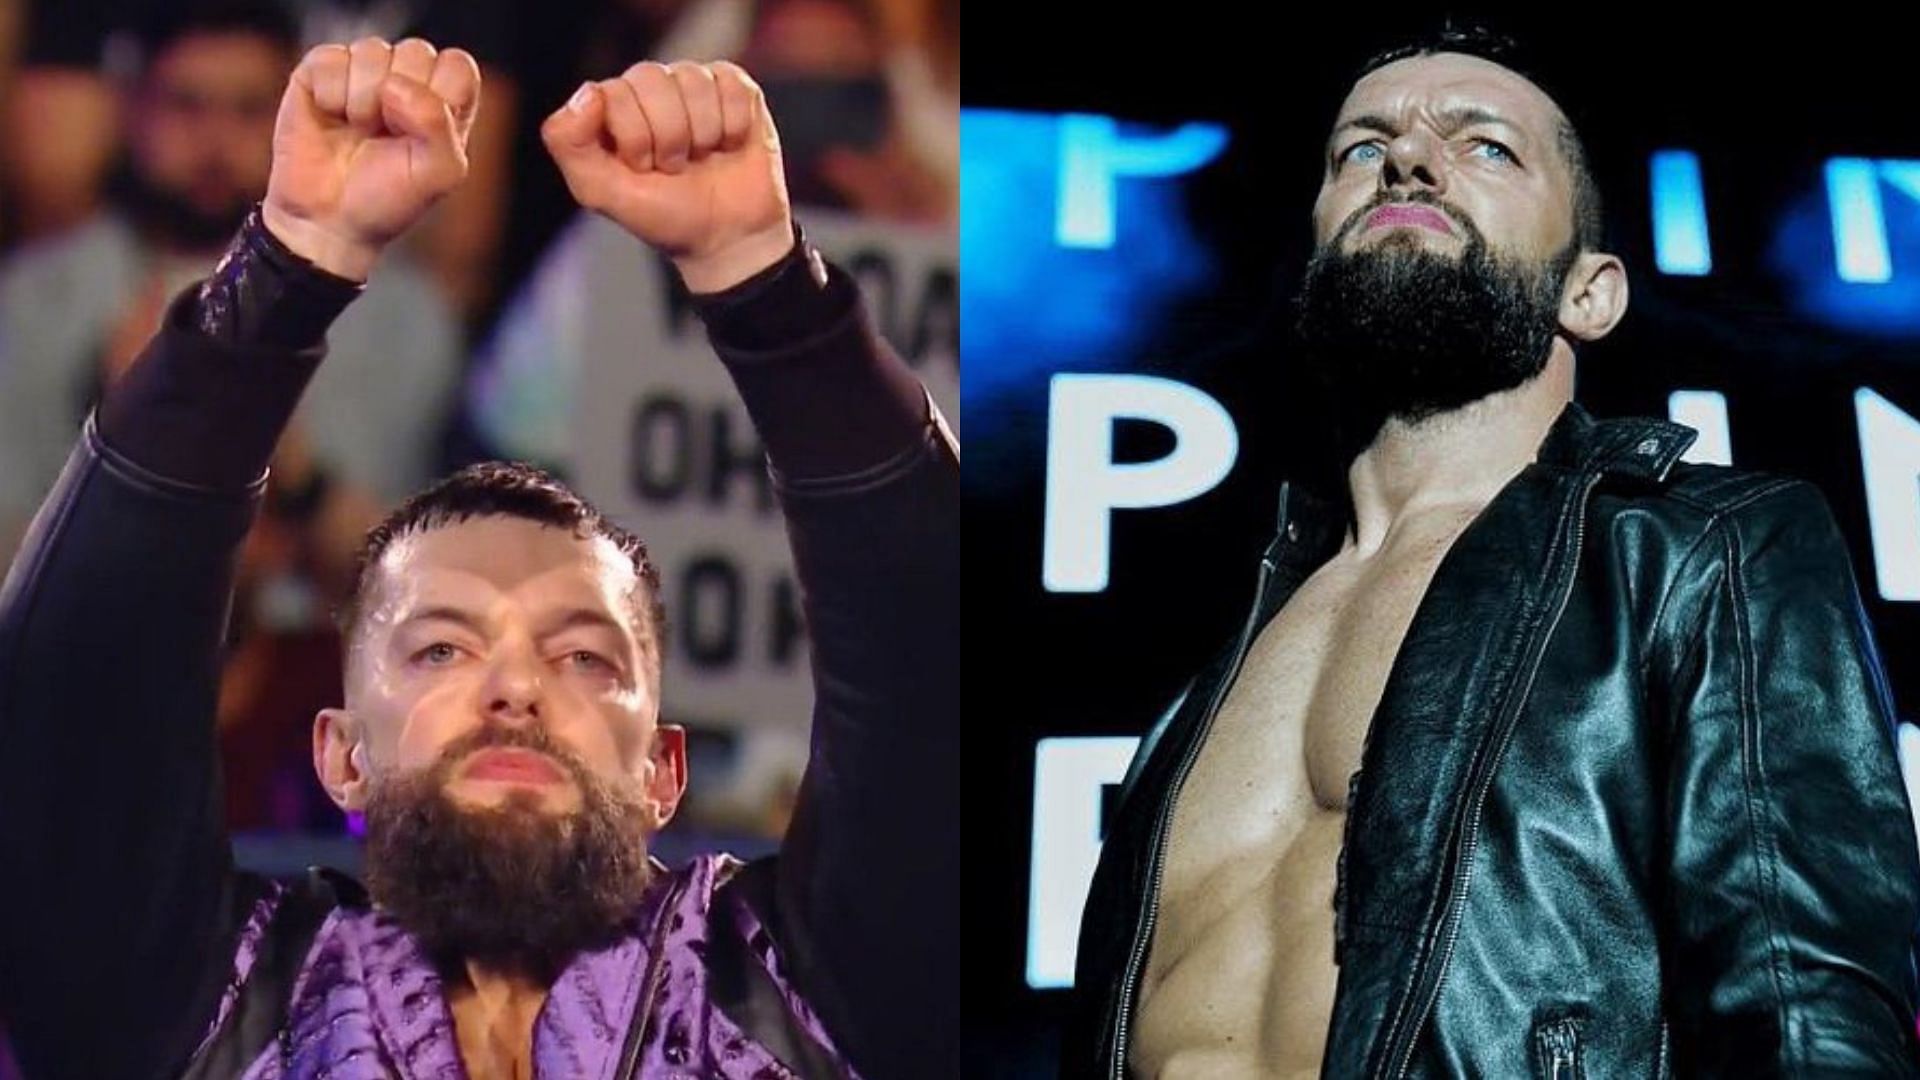 Finn Balor was unable to win at Money in the Bank